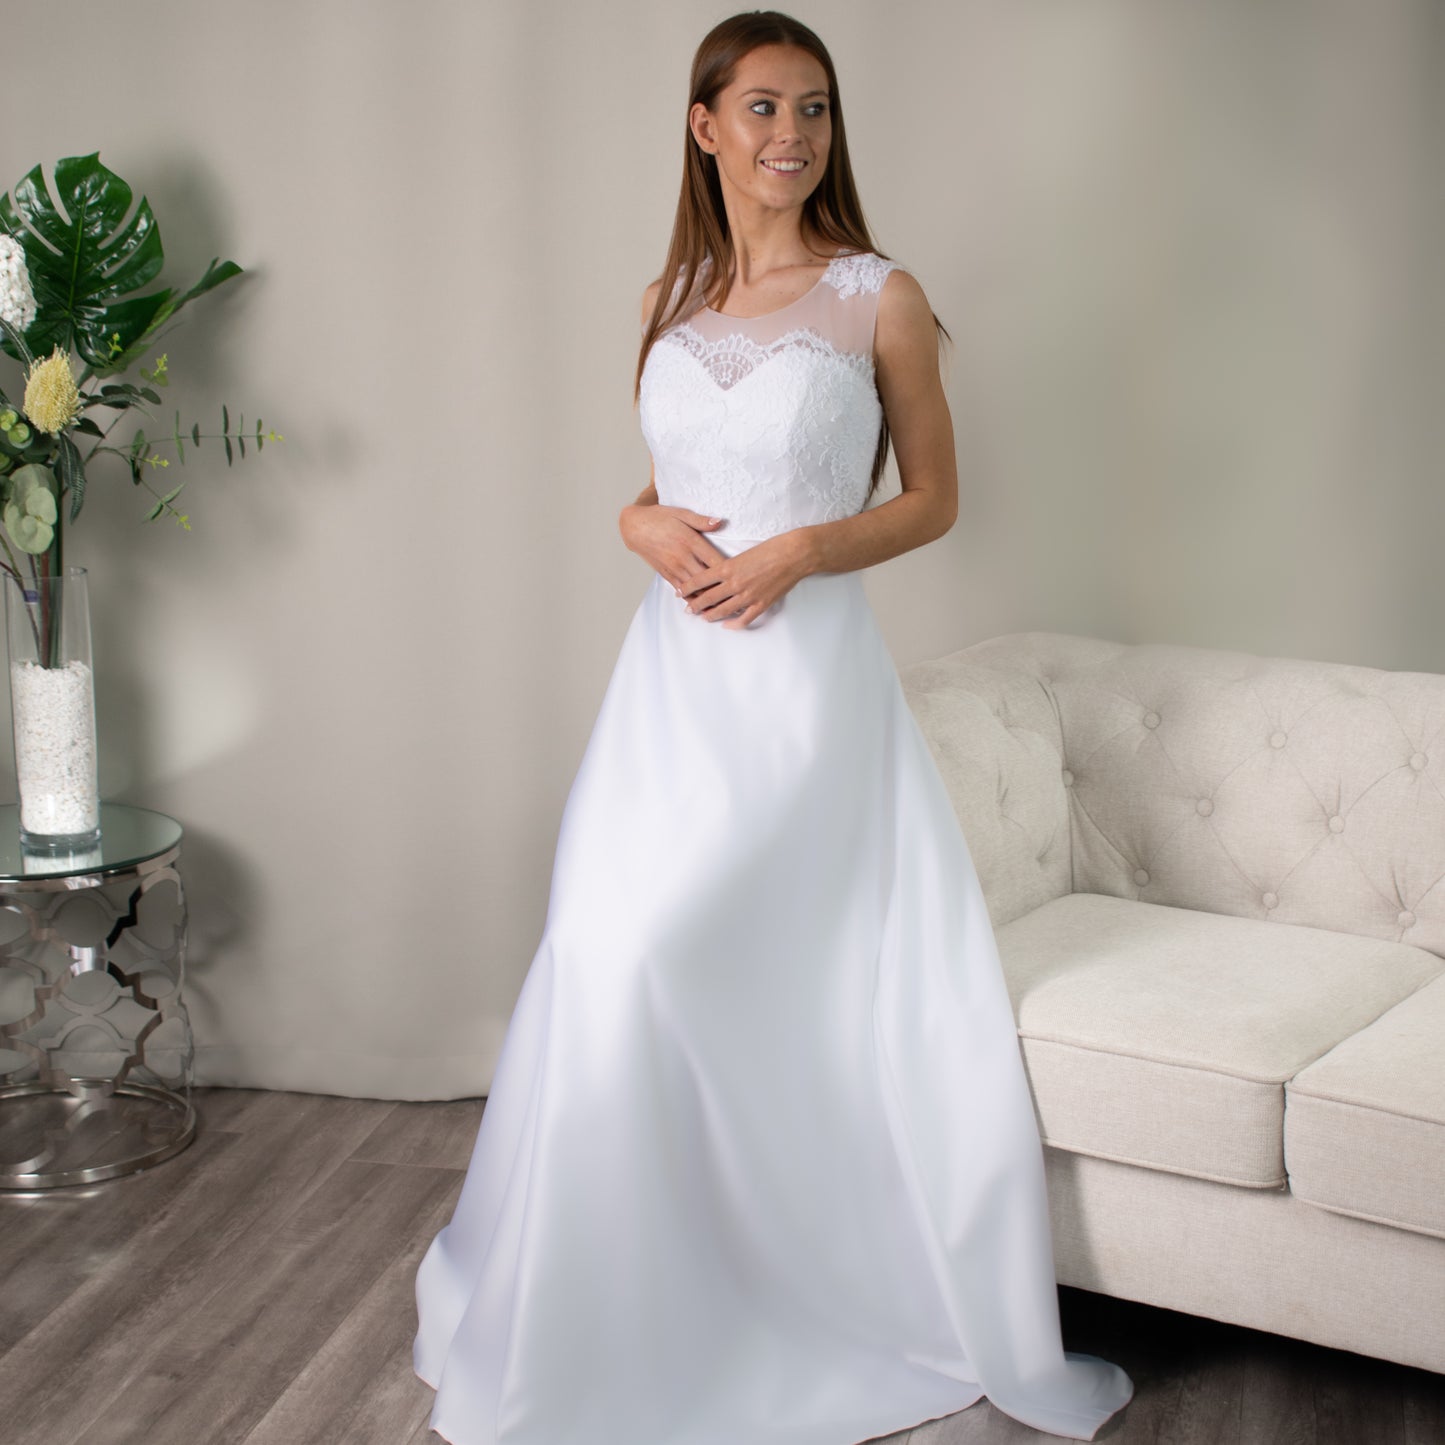 Matilda Debutante Dress by Divine Bridal with lace bodice, illusion and sweetheart neckline, satin skirt, and satin waist ribbon.